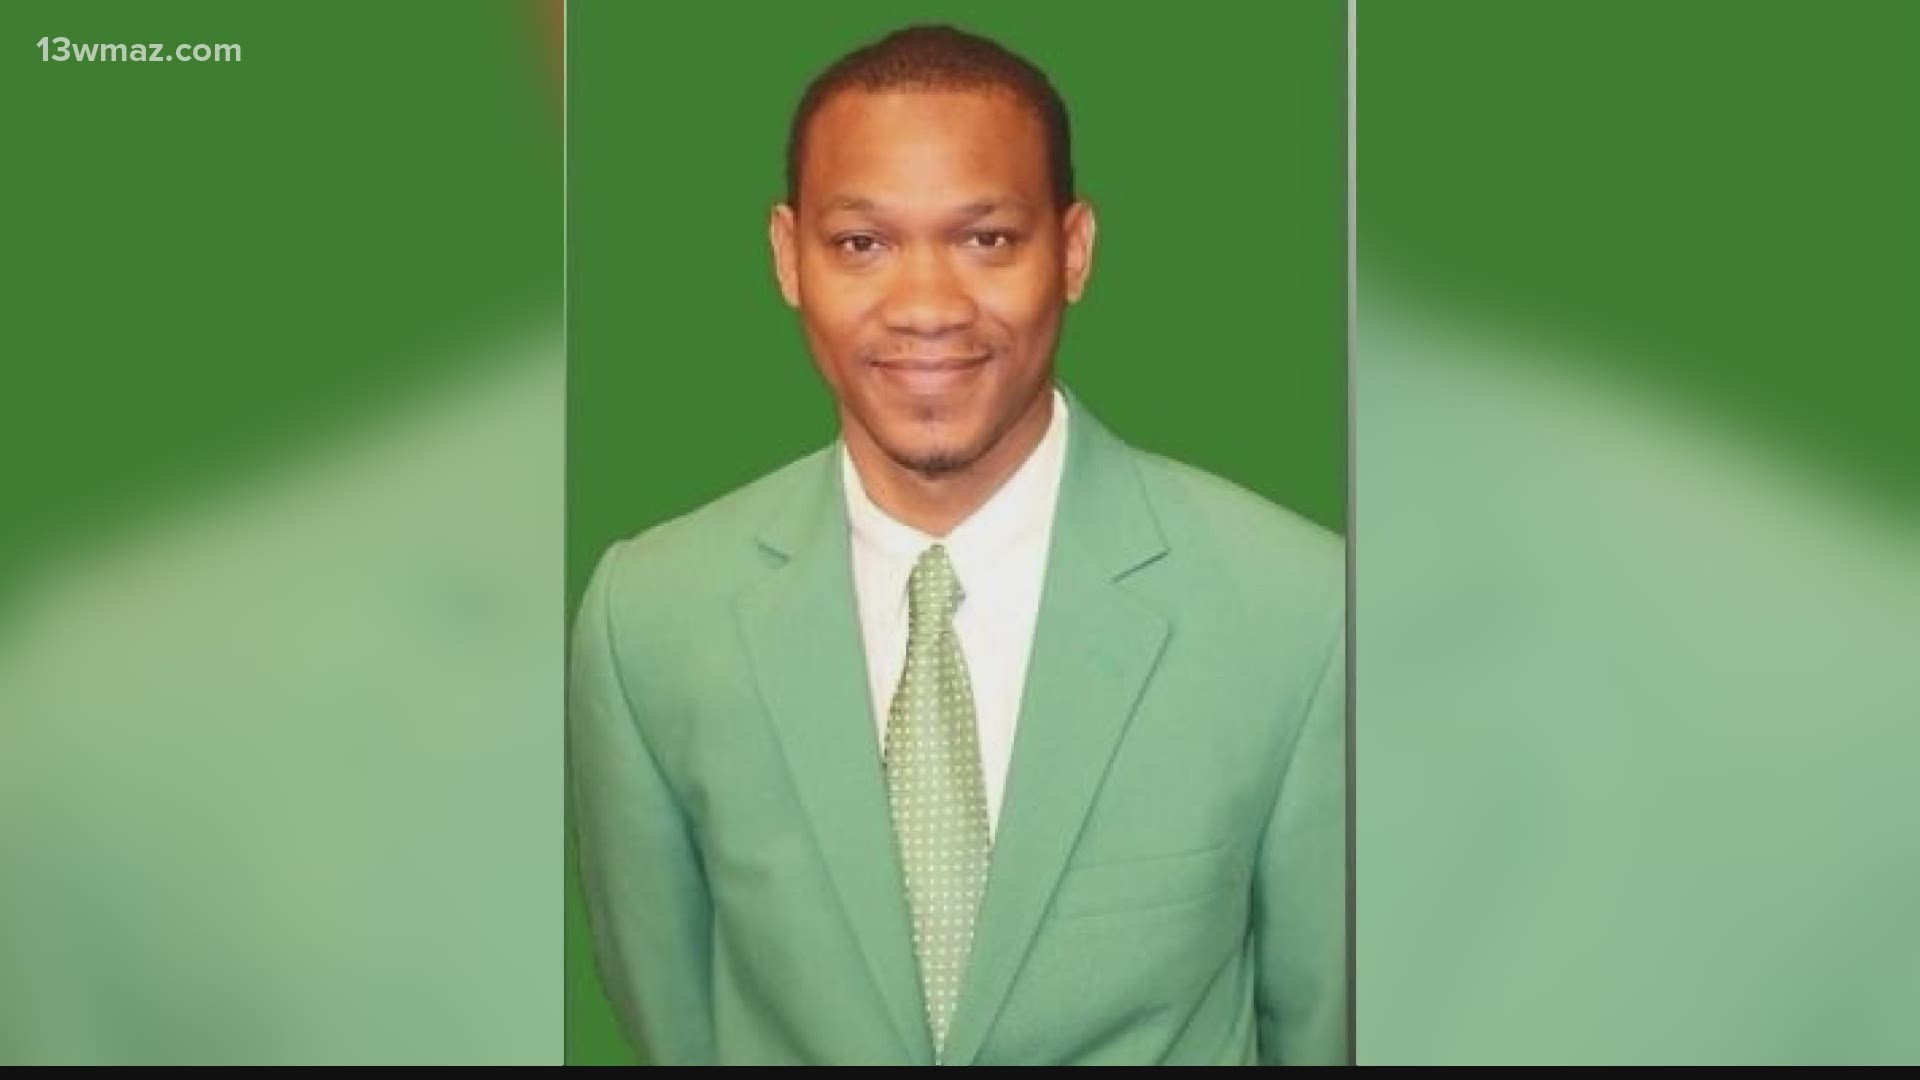 The city of Dublin is mourning the tragic loss of Dublin High School principal Jaroy Stuckey and his family Sunday.